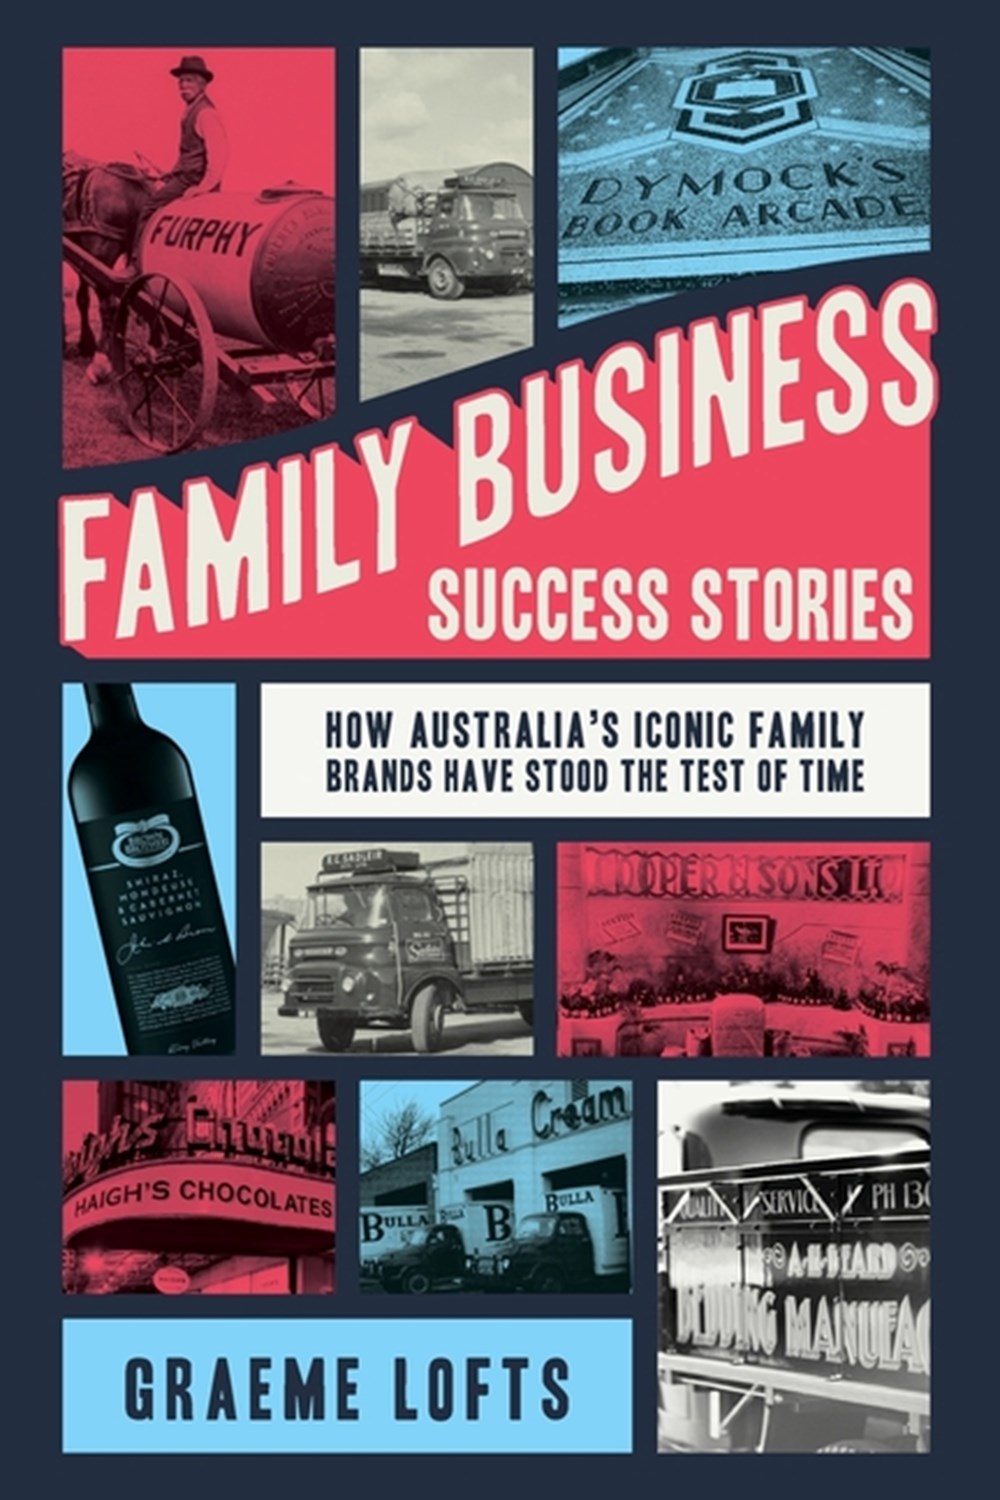 Family Business Success Stories How Australia's iconic family brands have stood the test of time